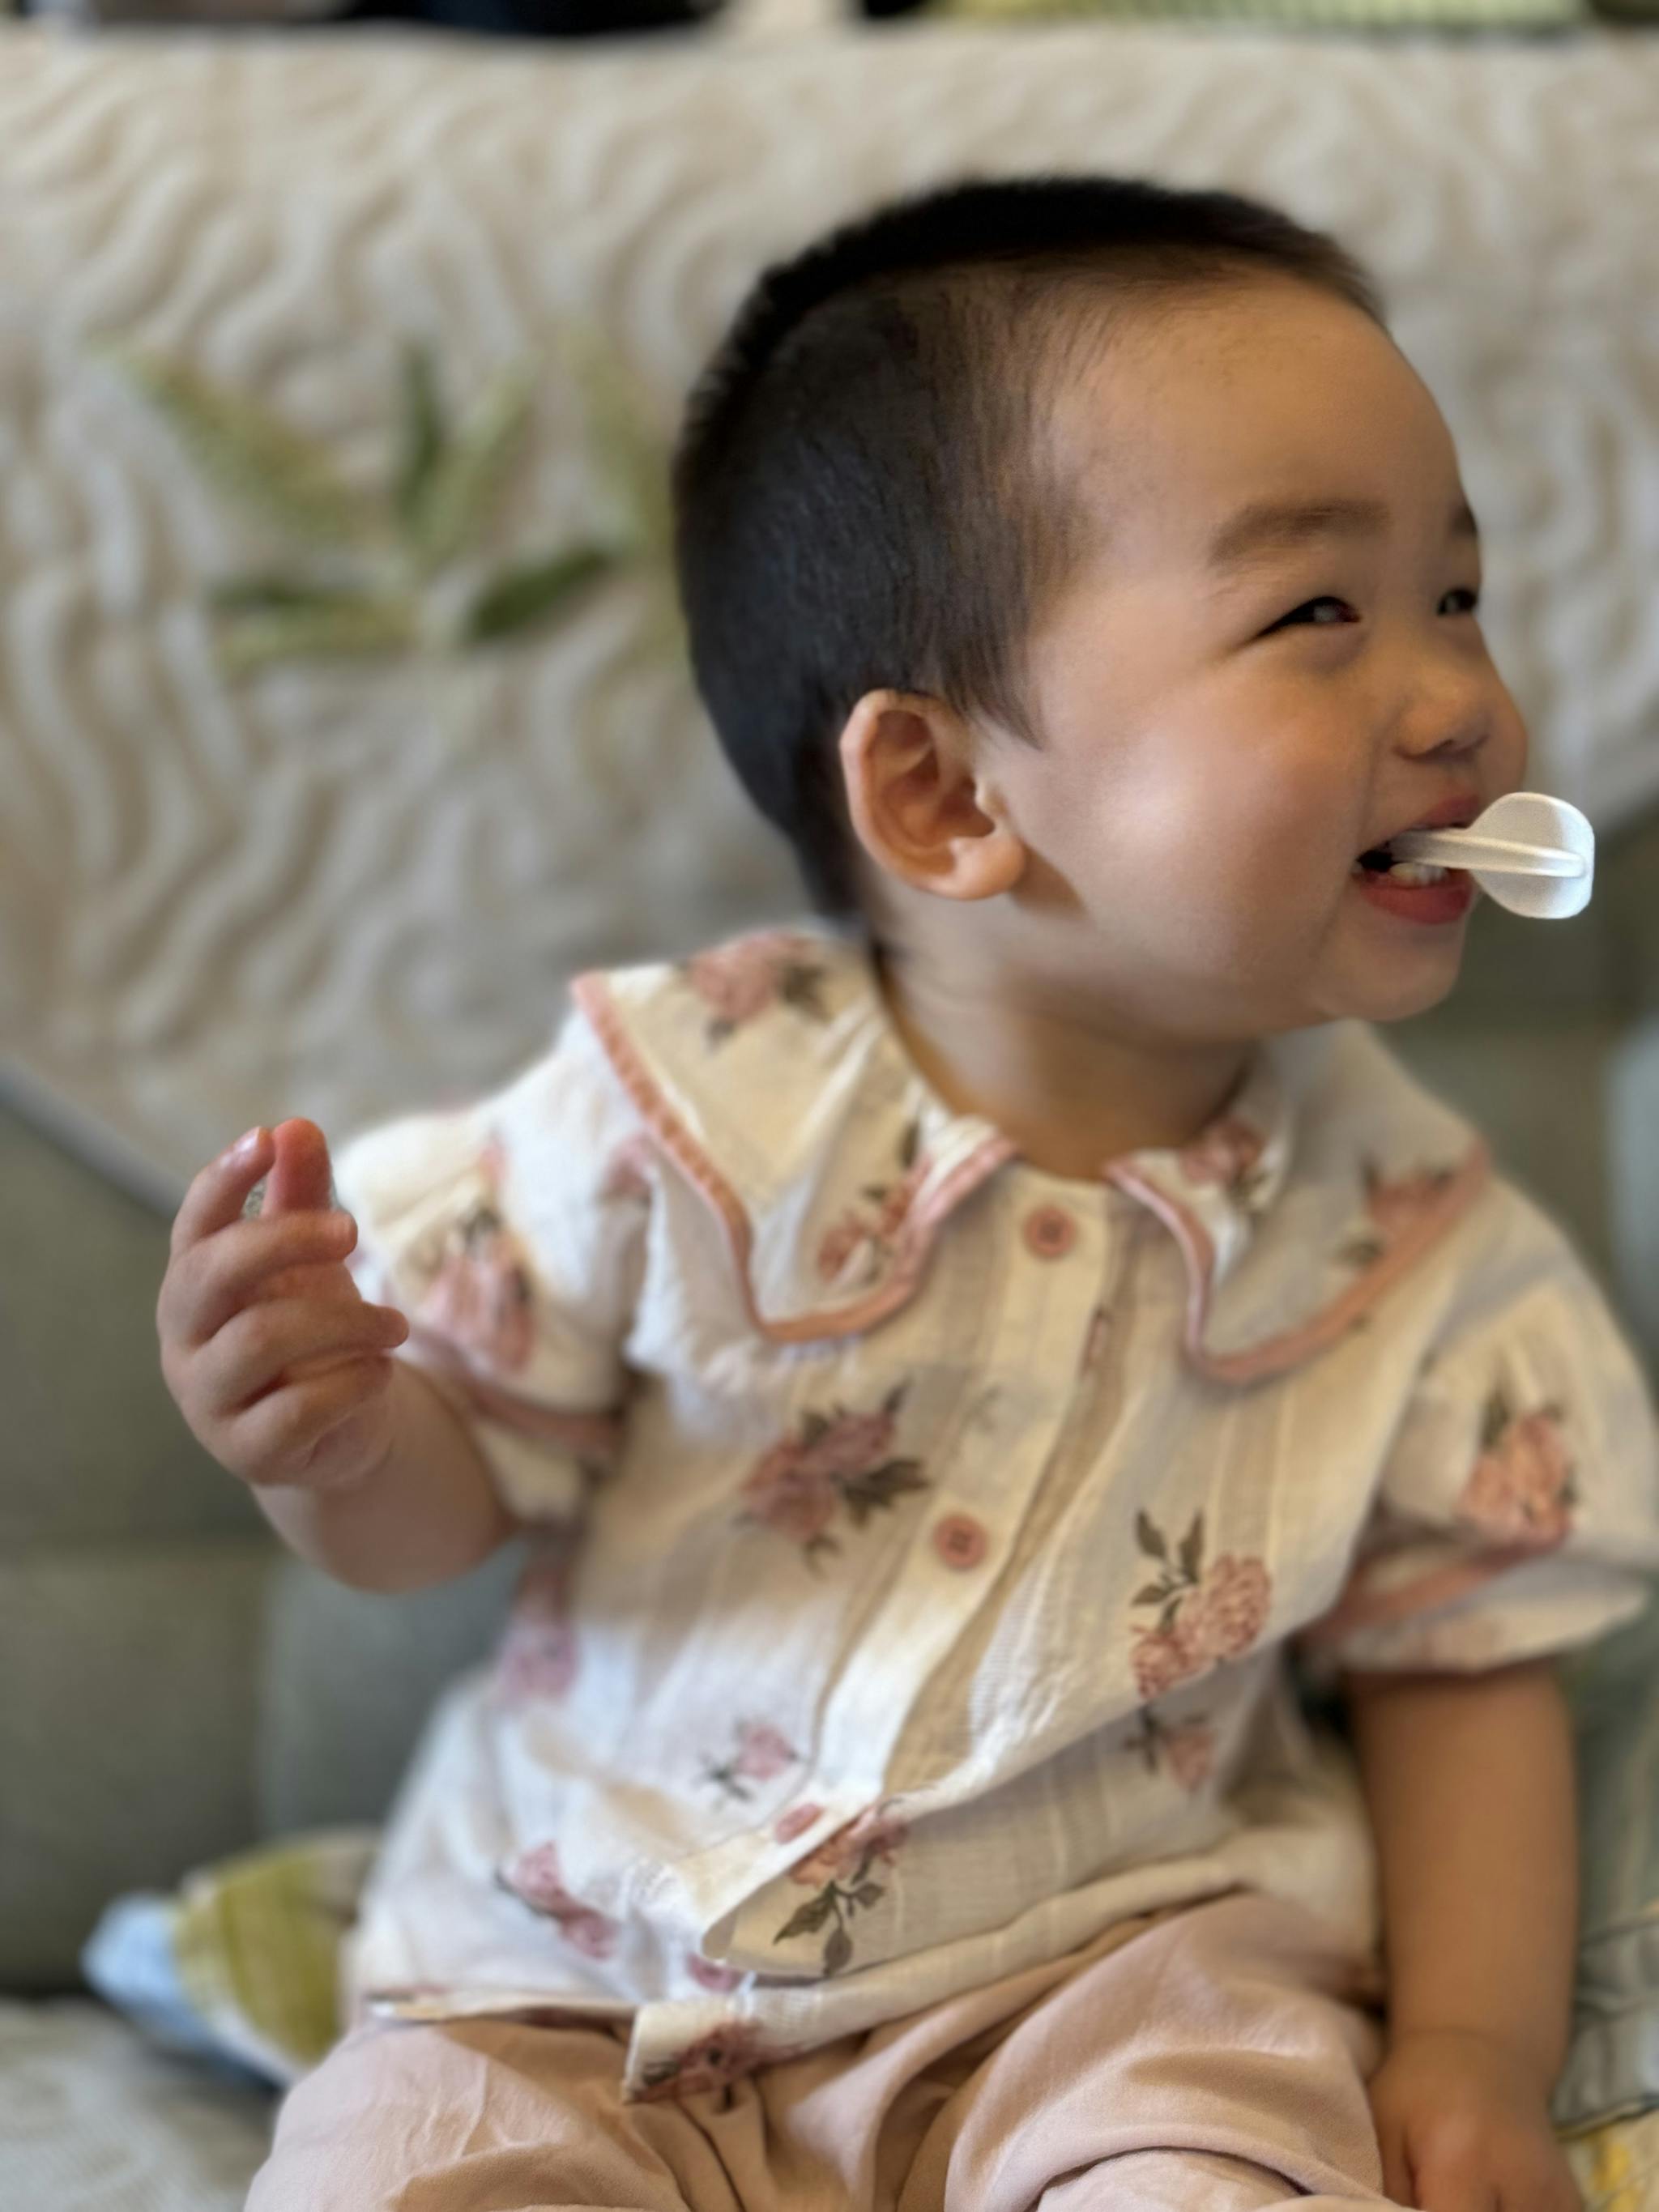 A smiling toddler in a patterned outfit sits eating from a spoon, looking joyful